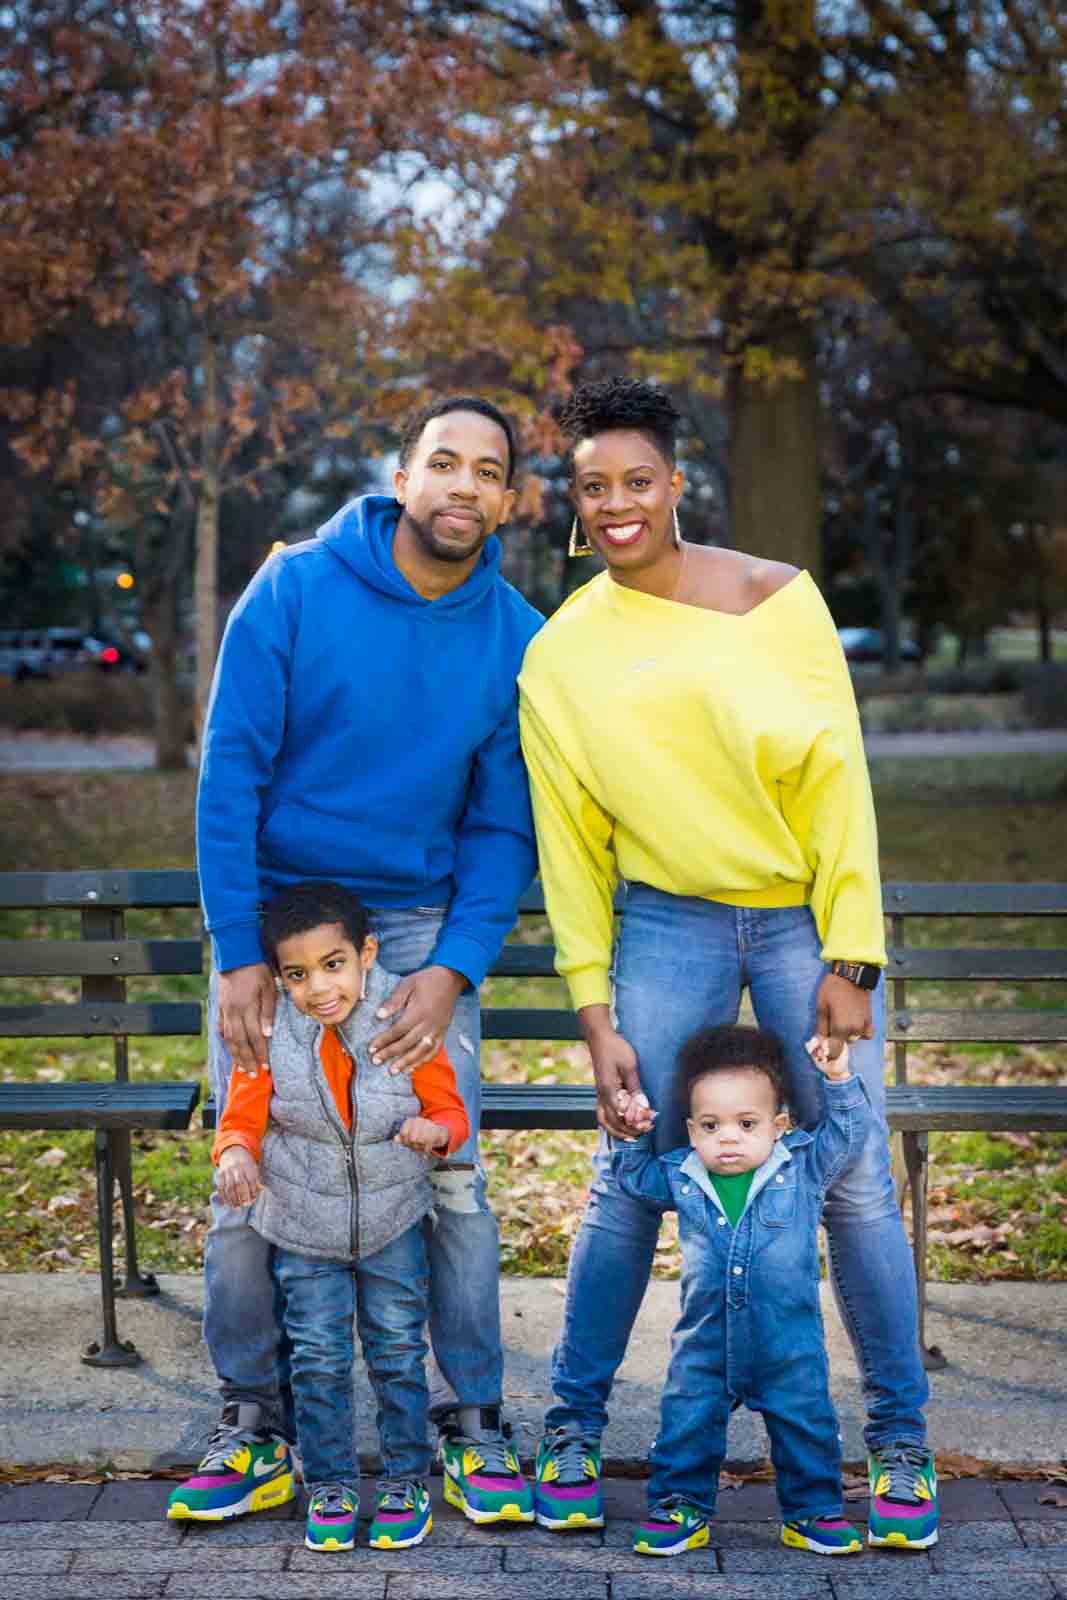 Flushing Meadows Corona Park family portrait of parents and two children wearing brightly colored clothes